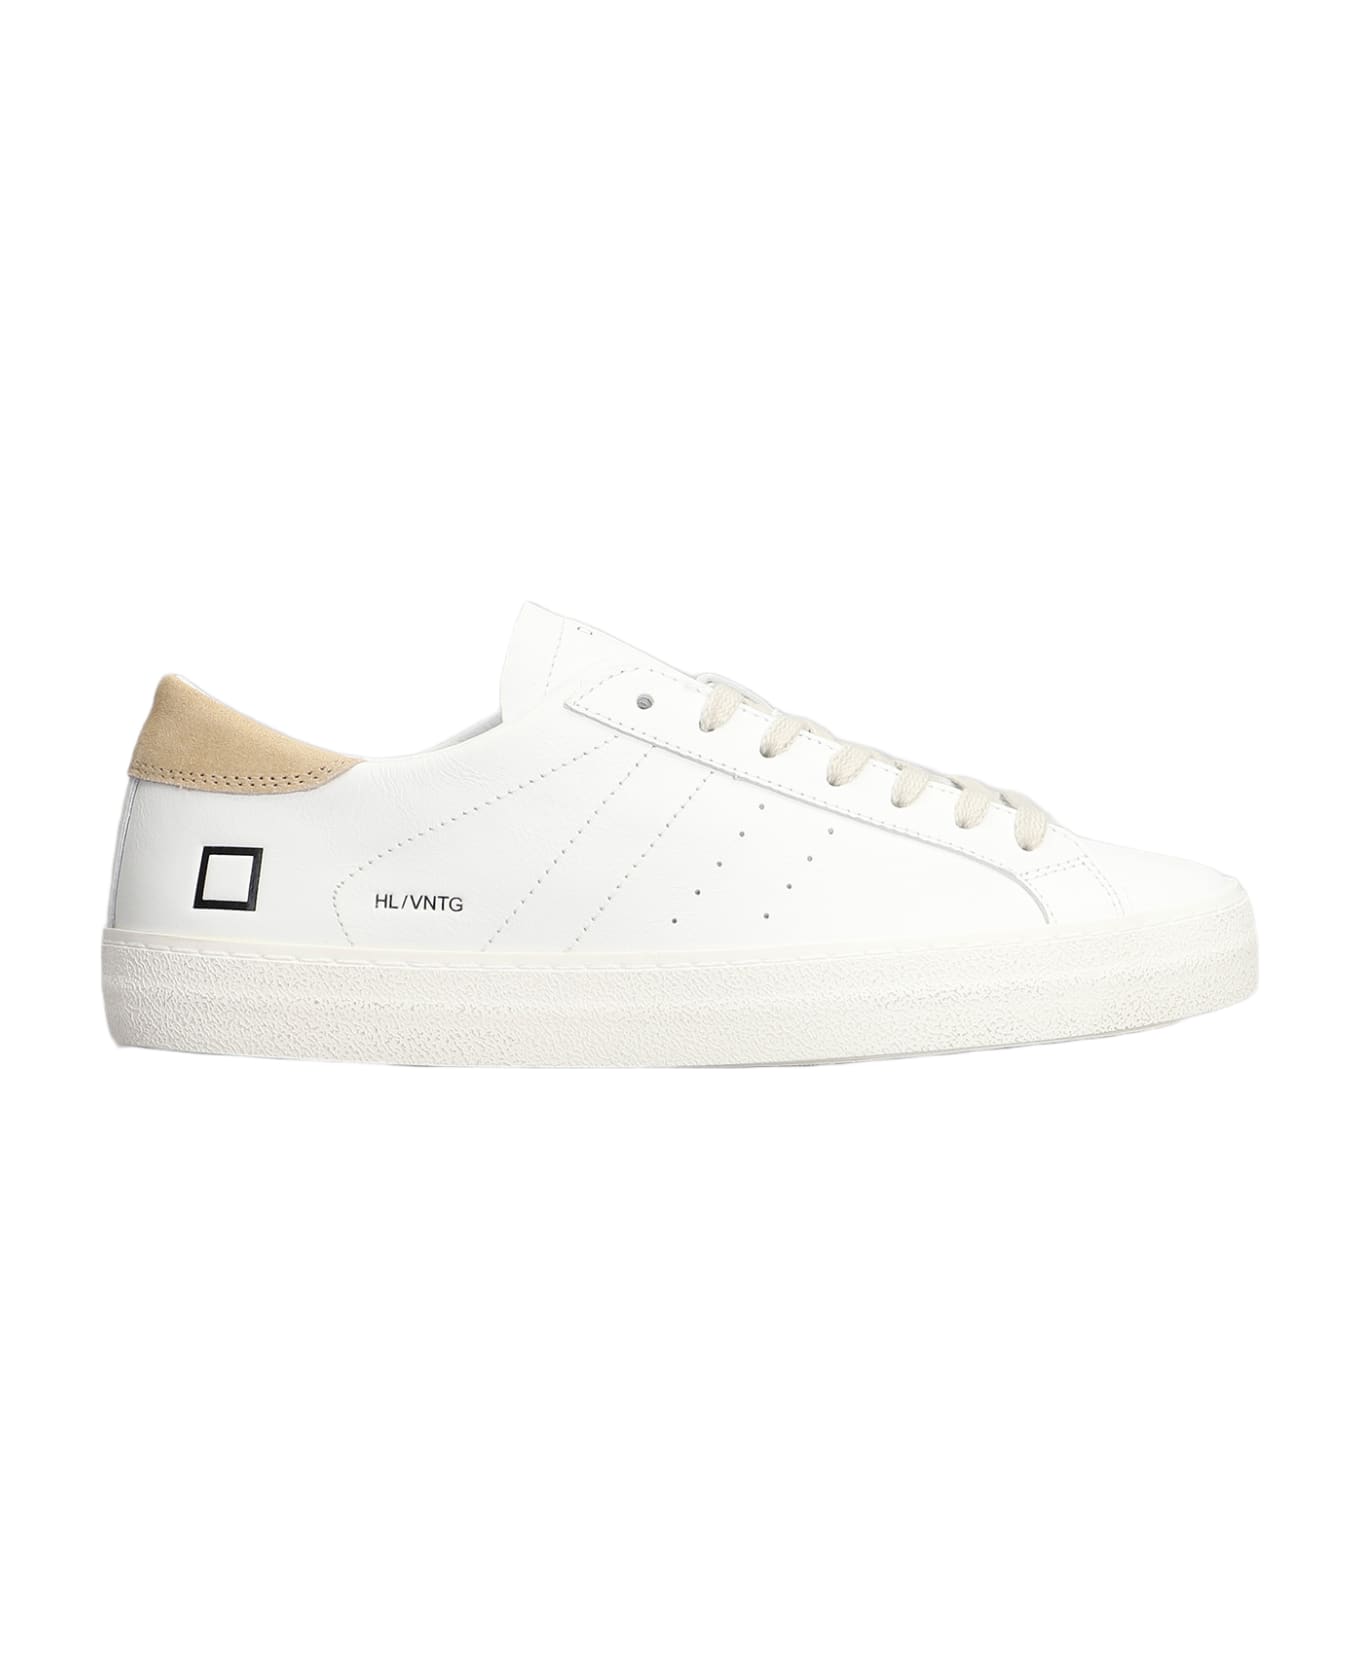 D.A.T.E. Hill Low Sneakers In White Leather D.A.T.E. - WHITE スニーカー